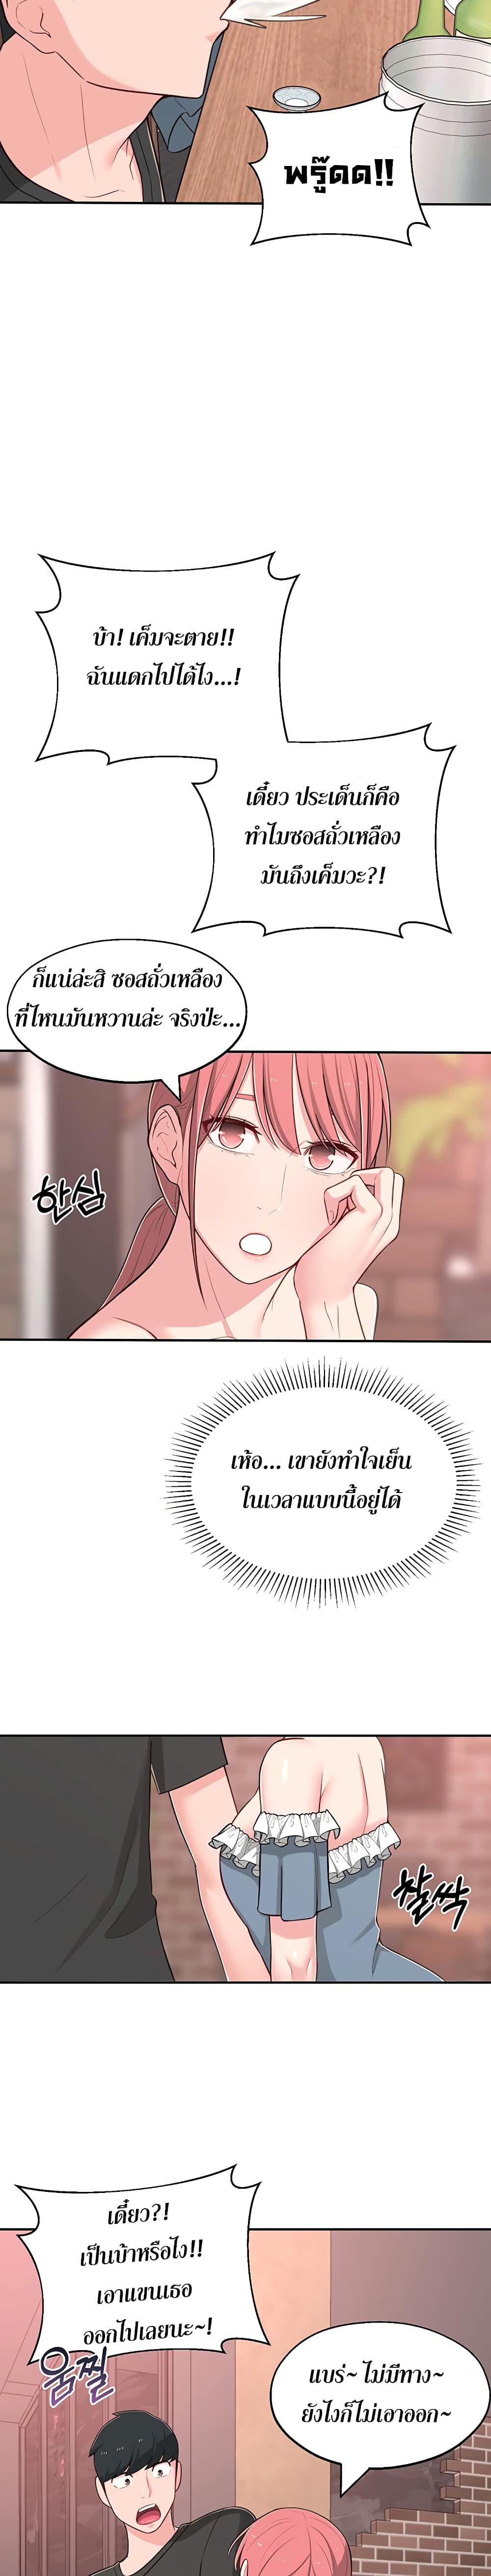 A Knowing Sister 12 ภาพ 25